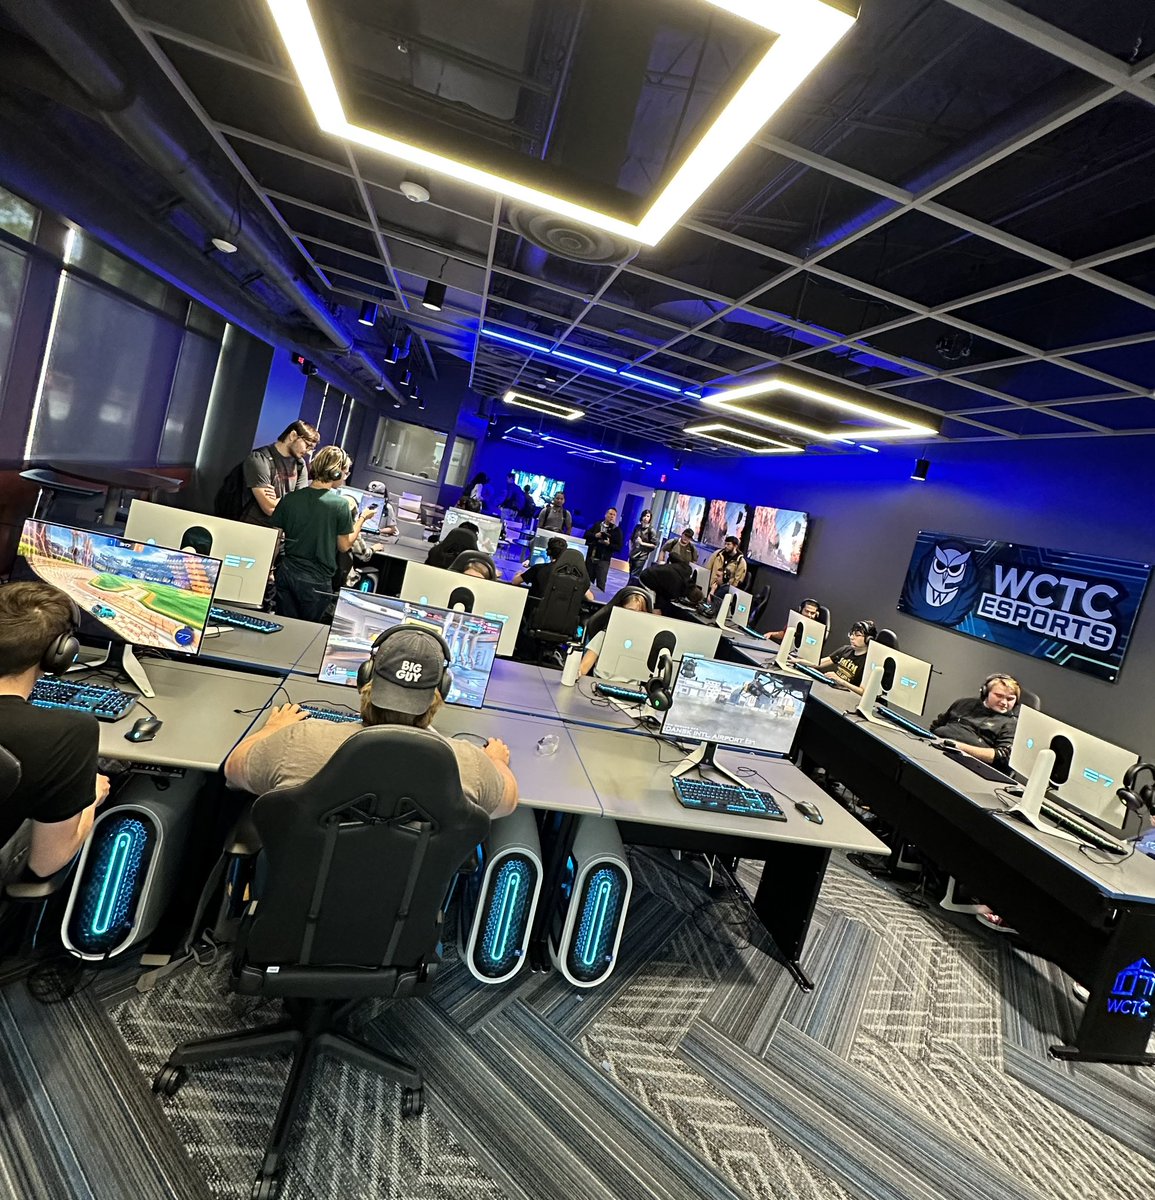 Had a blast today at @WCTC’s grand opening of their new esports facility! Excited for their future and grateful to have them among our growing roster of WI universities with esports programs.